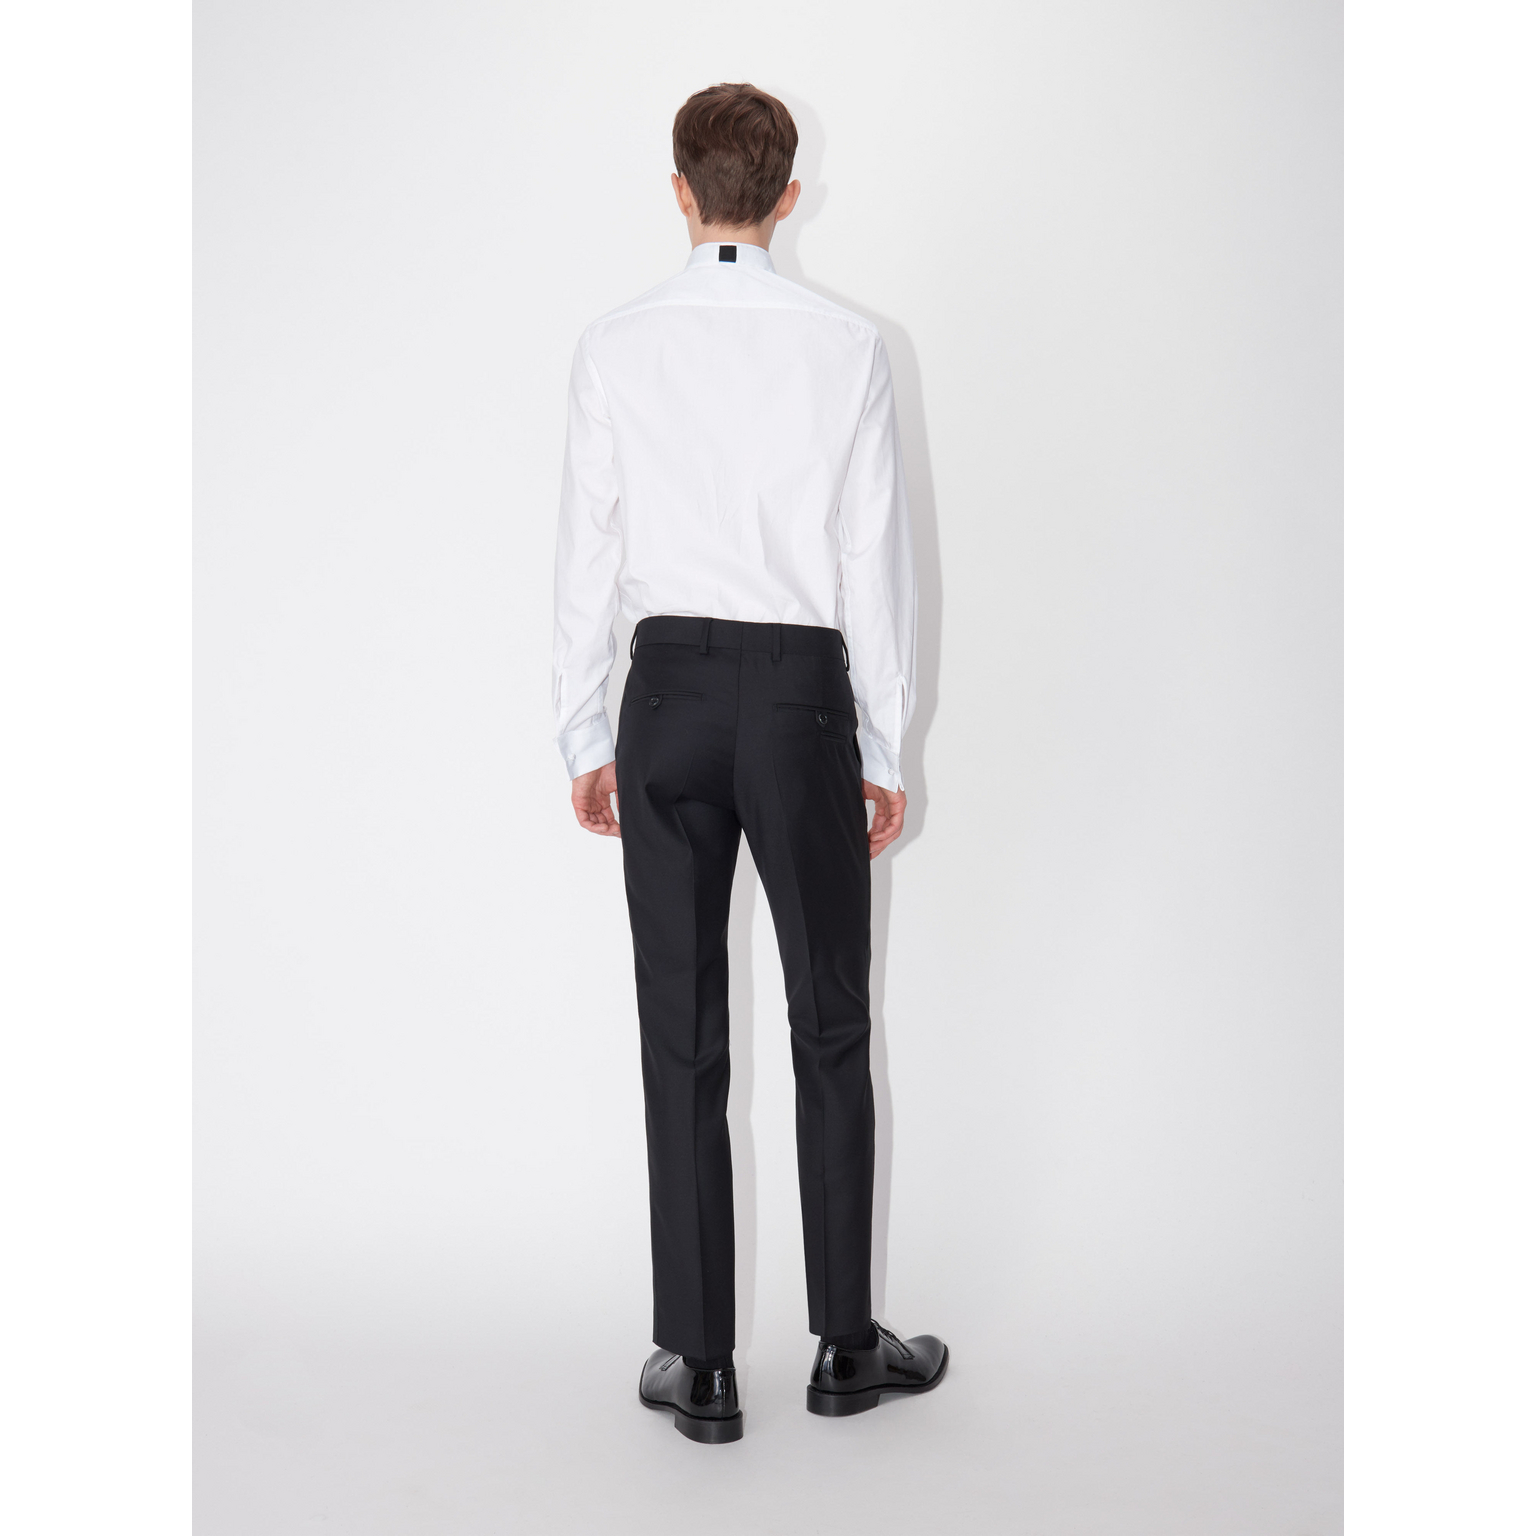 Tiger of Sweden - Thulin Tux Trousers Man